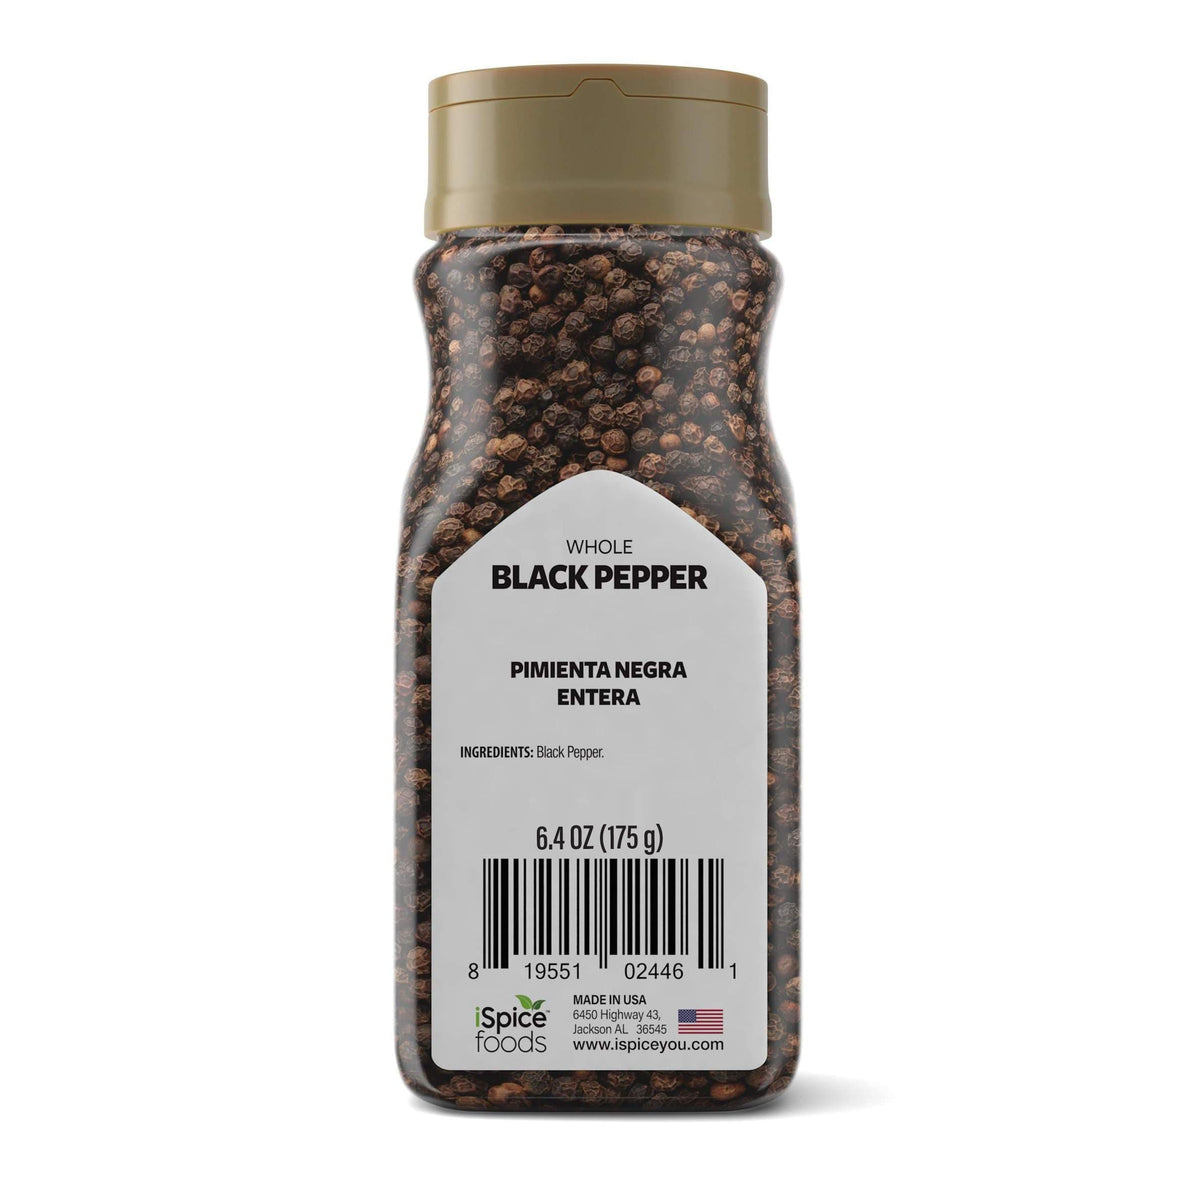 What Is the Best Quality Whole Black Pepper?